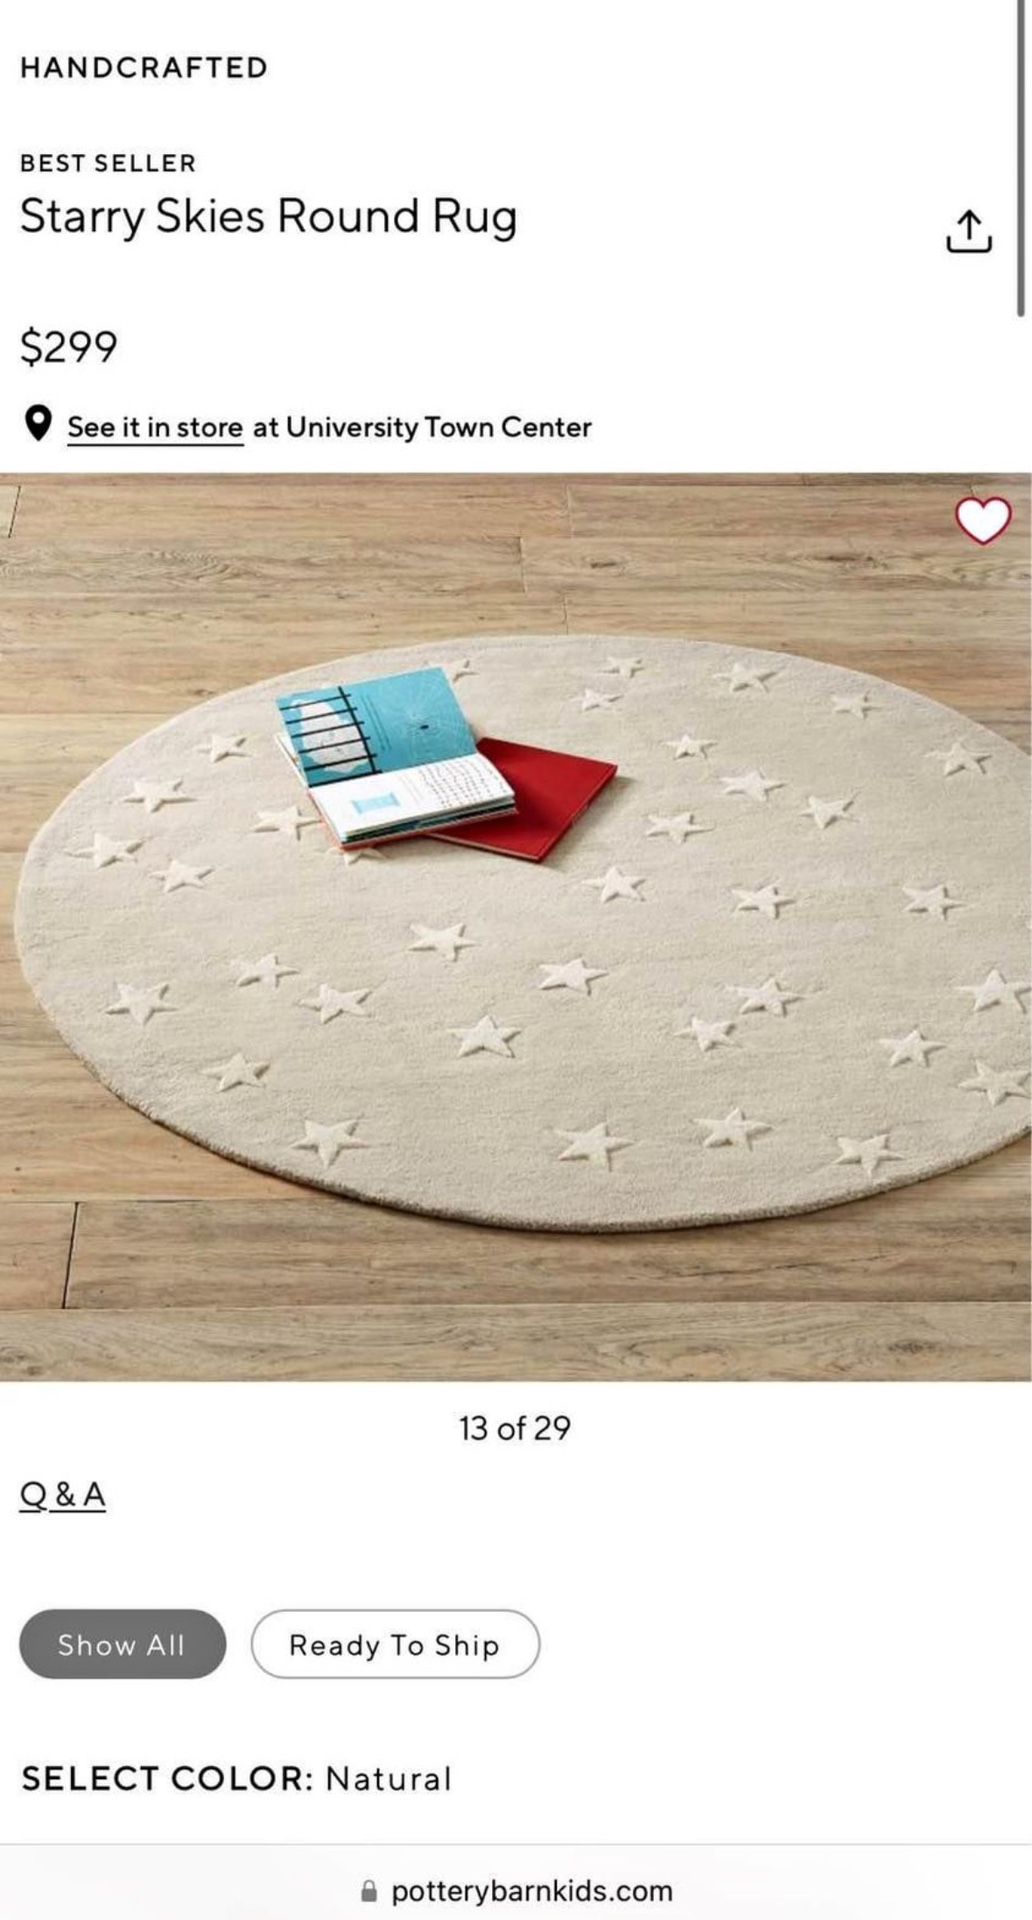 Starry Skies Round Rug in Natural Pottery Barn Kids Exclusive 5Ft Retail $299